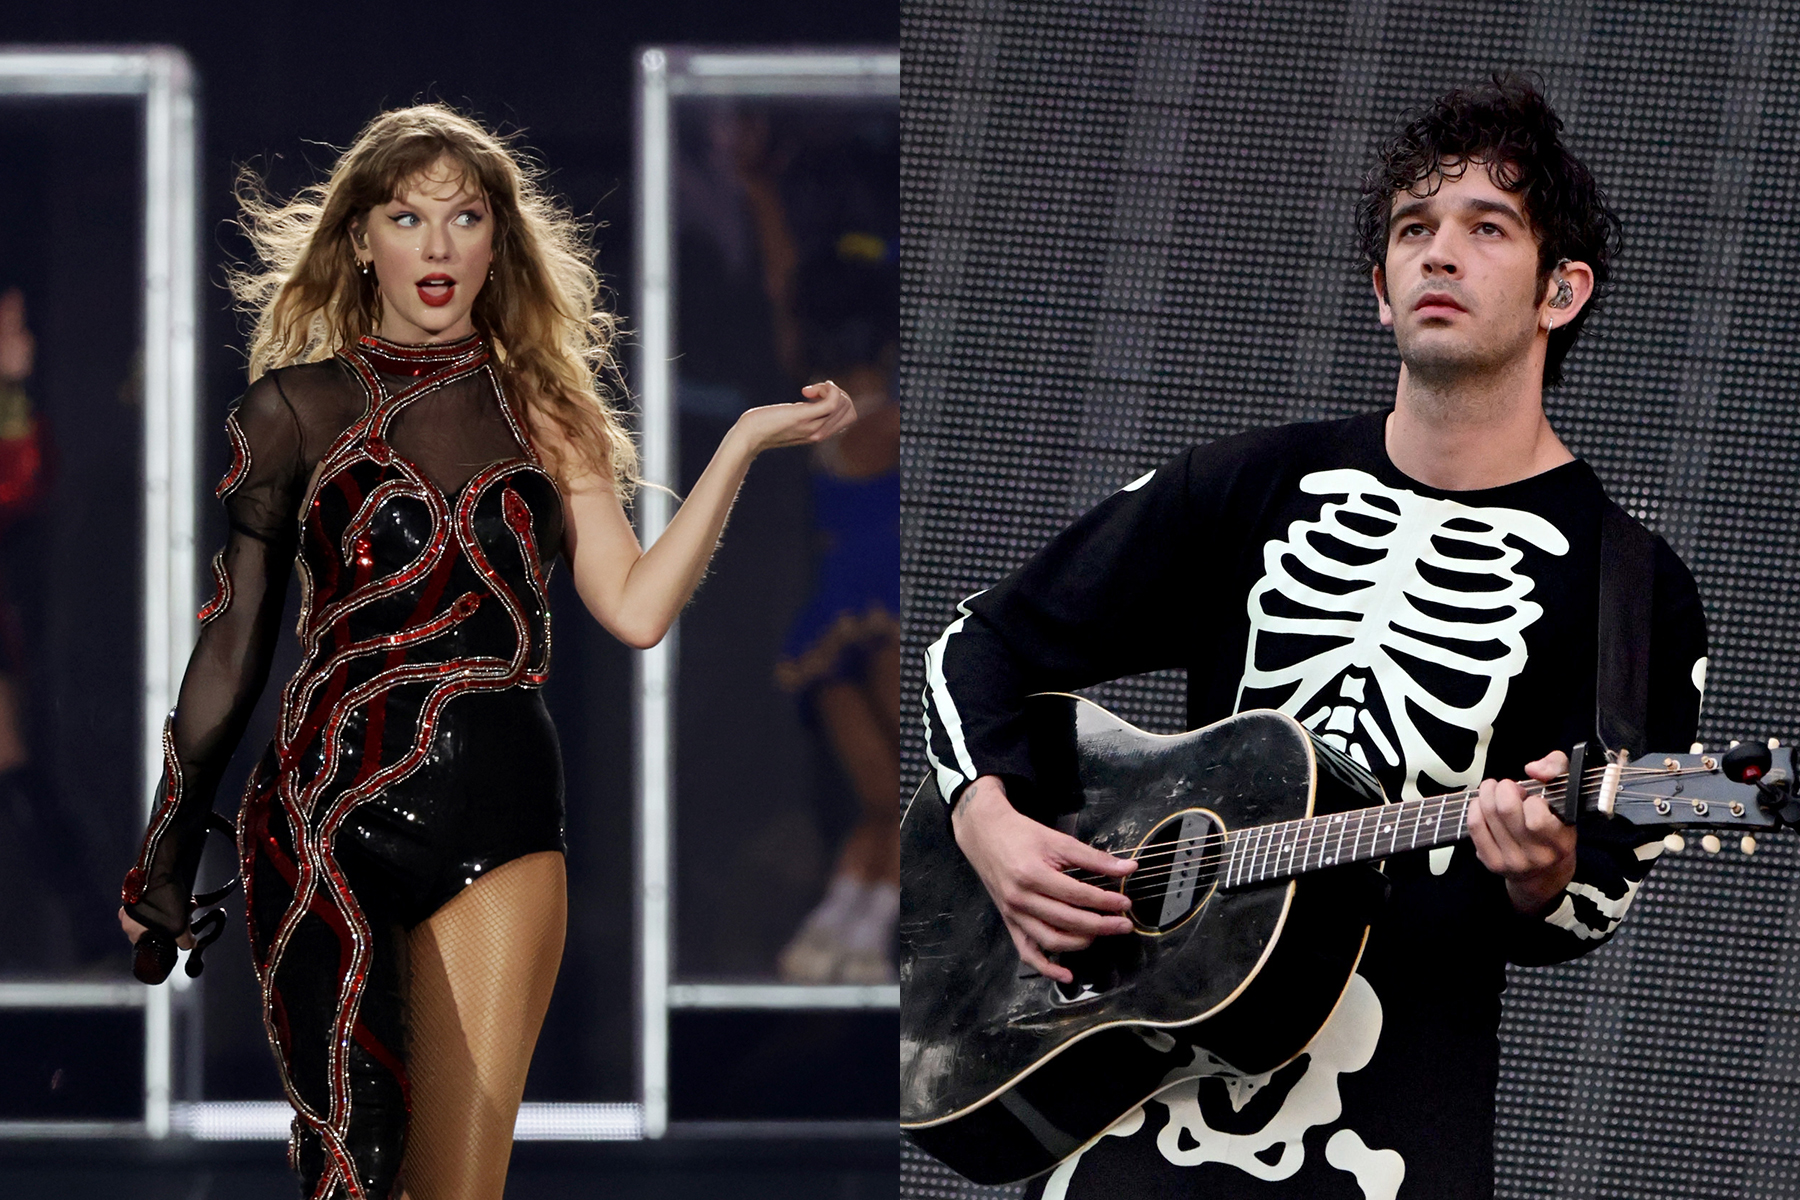 Swifties Are Not Happy That Taylor’s Matty Healy Situationship Gets So Much Attention on ‘TTPD’